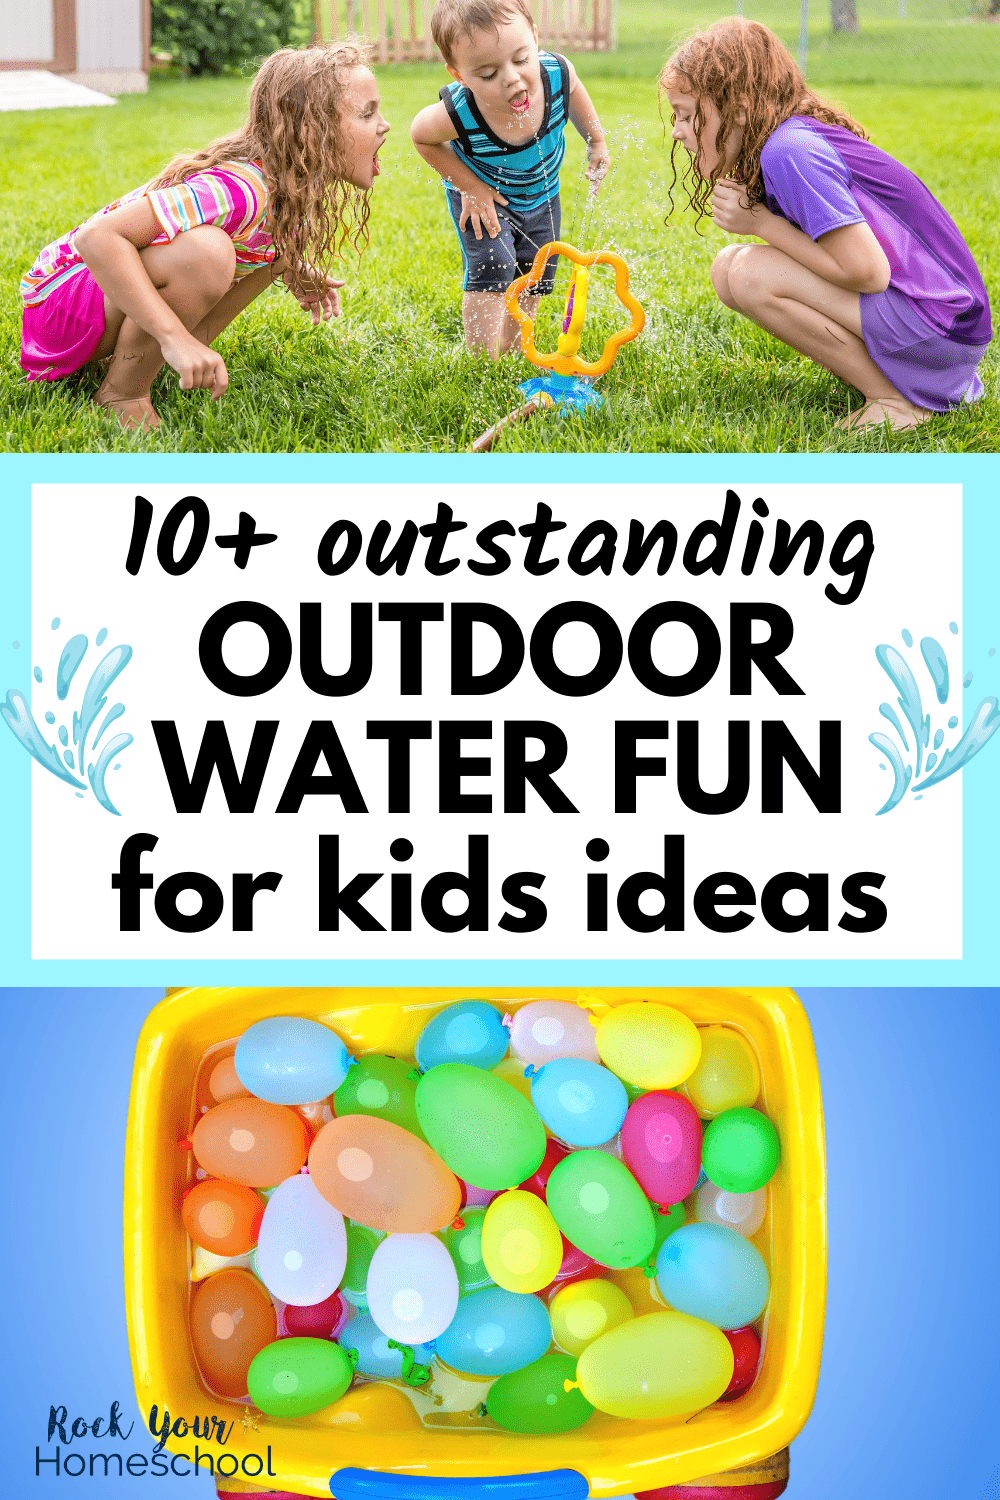 Outdoor Water Fun for Kids: 10+ Ideas & Tips for Cool Ways to Have a Blast